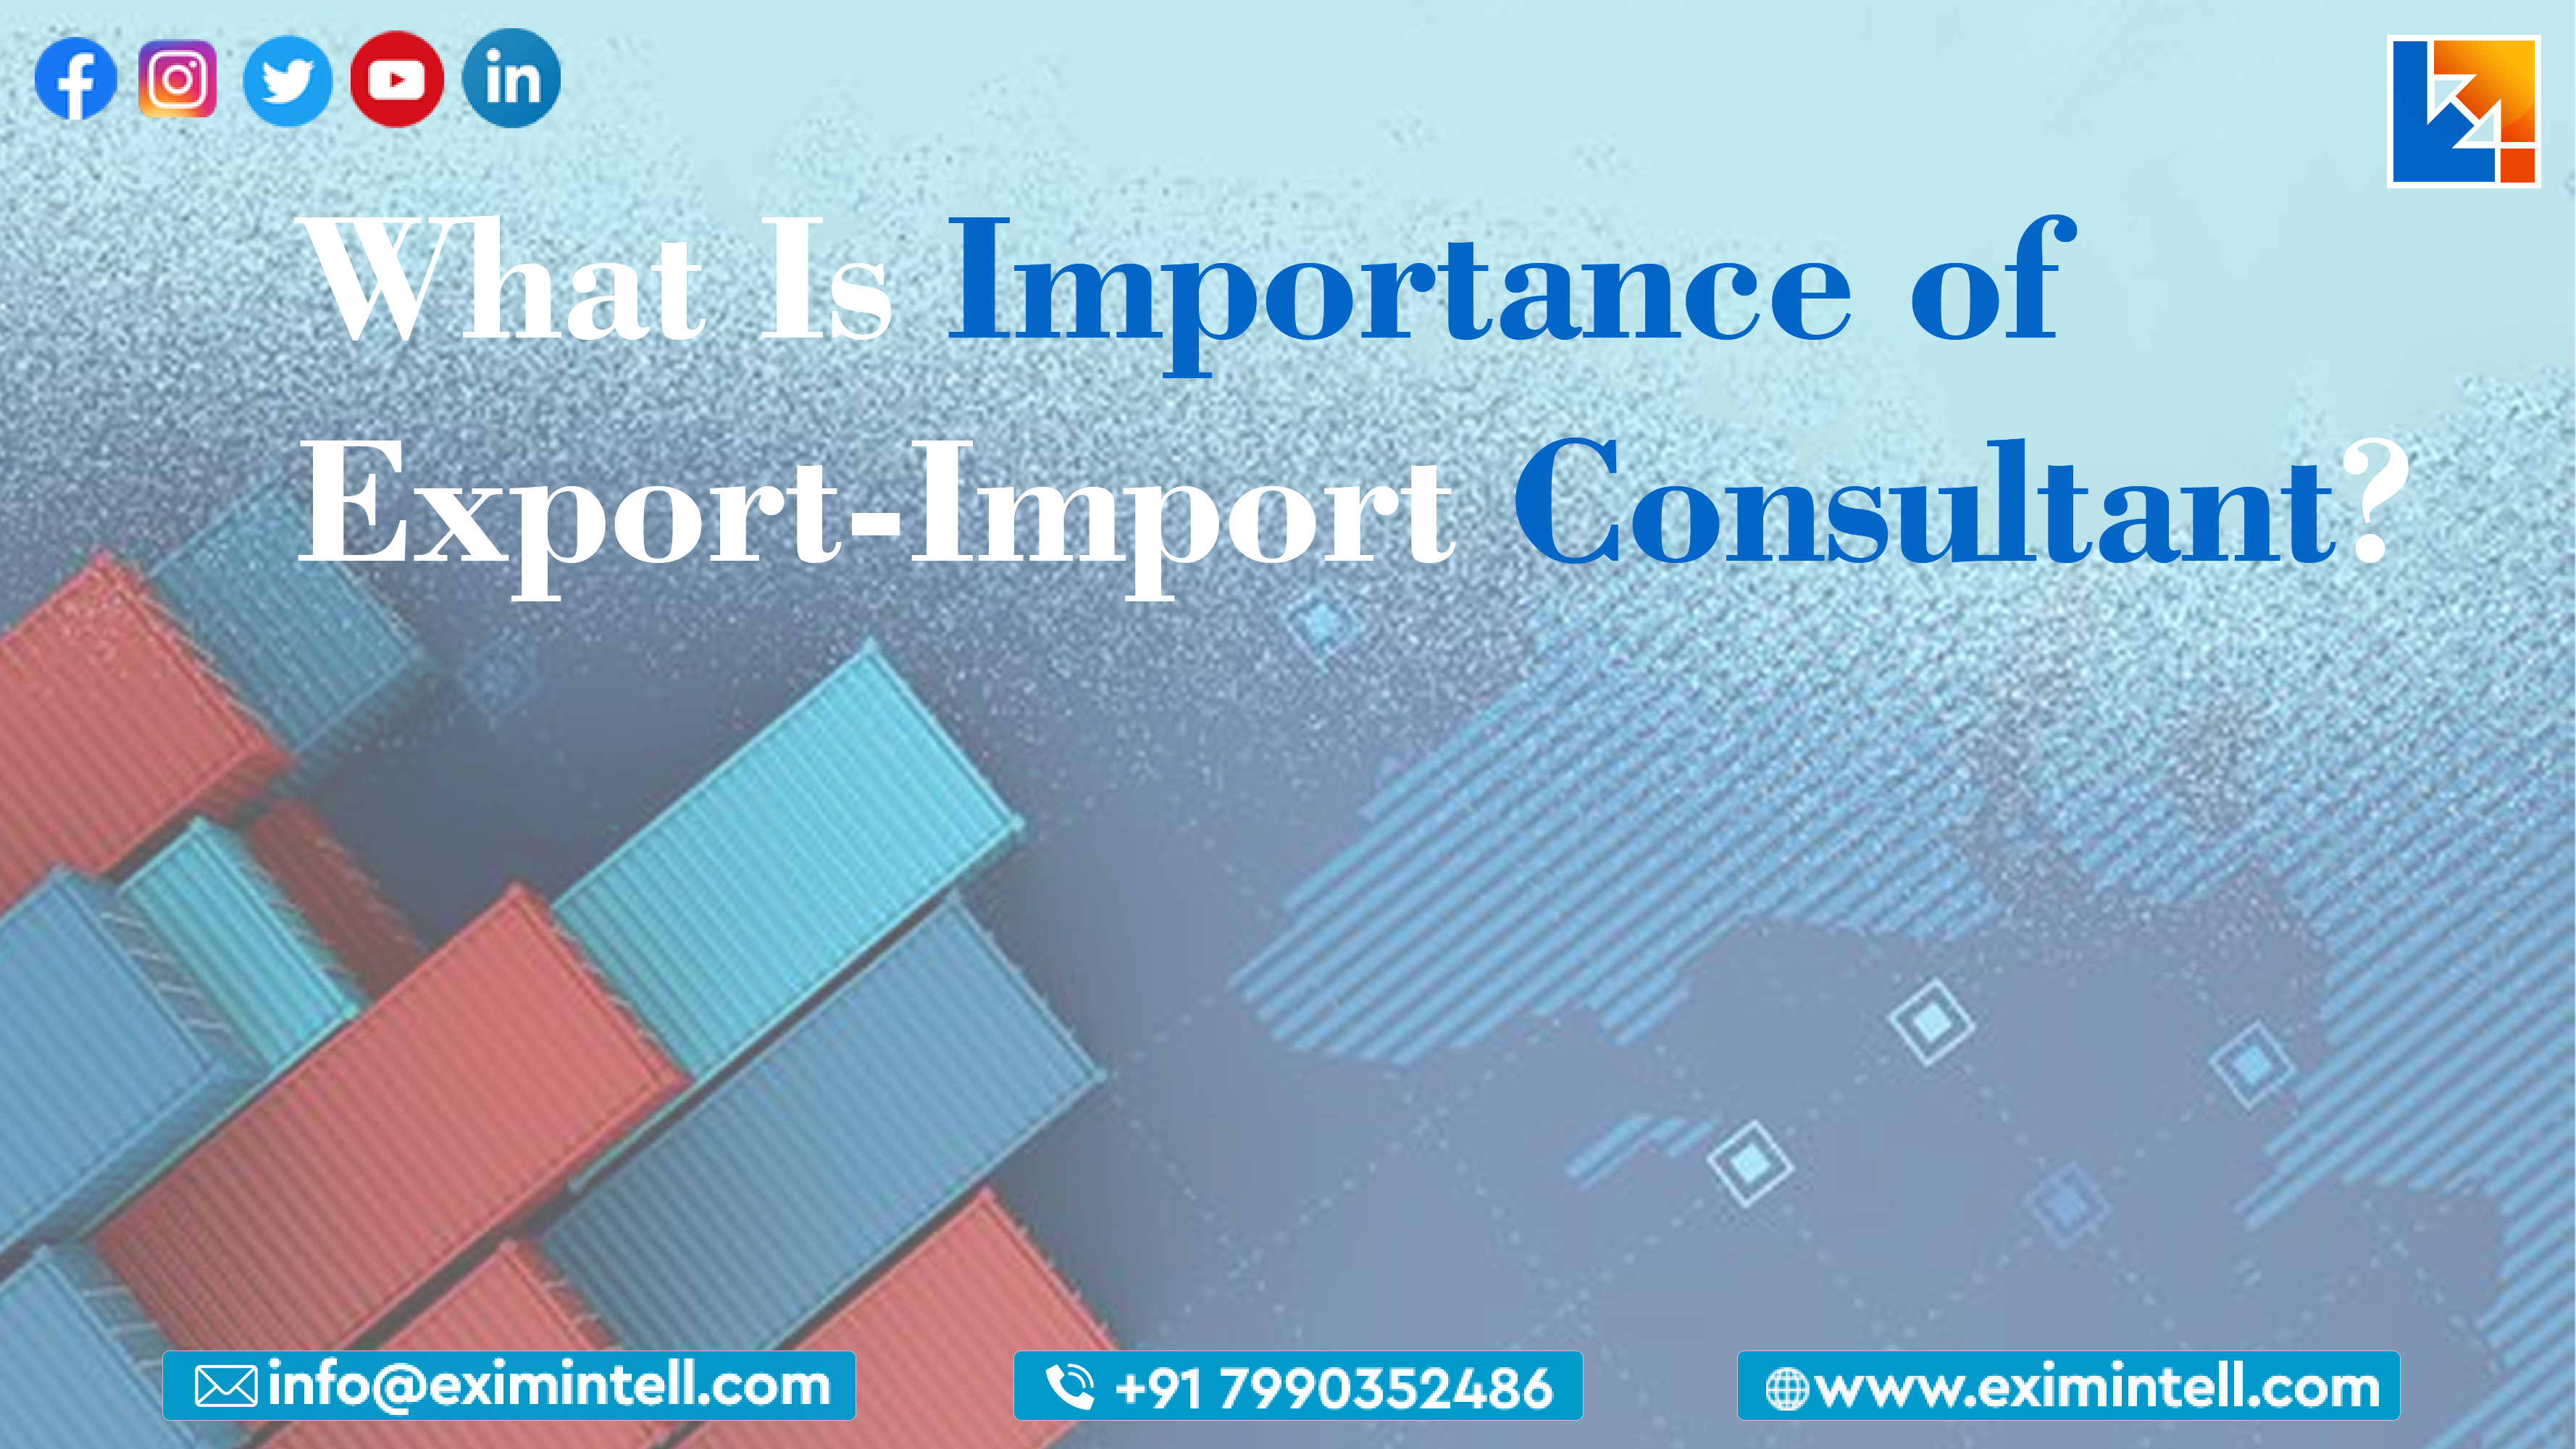 What Is Importance of Export-Import Consultant?